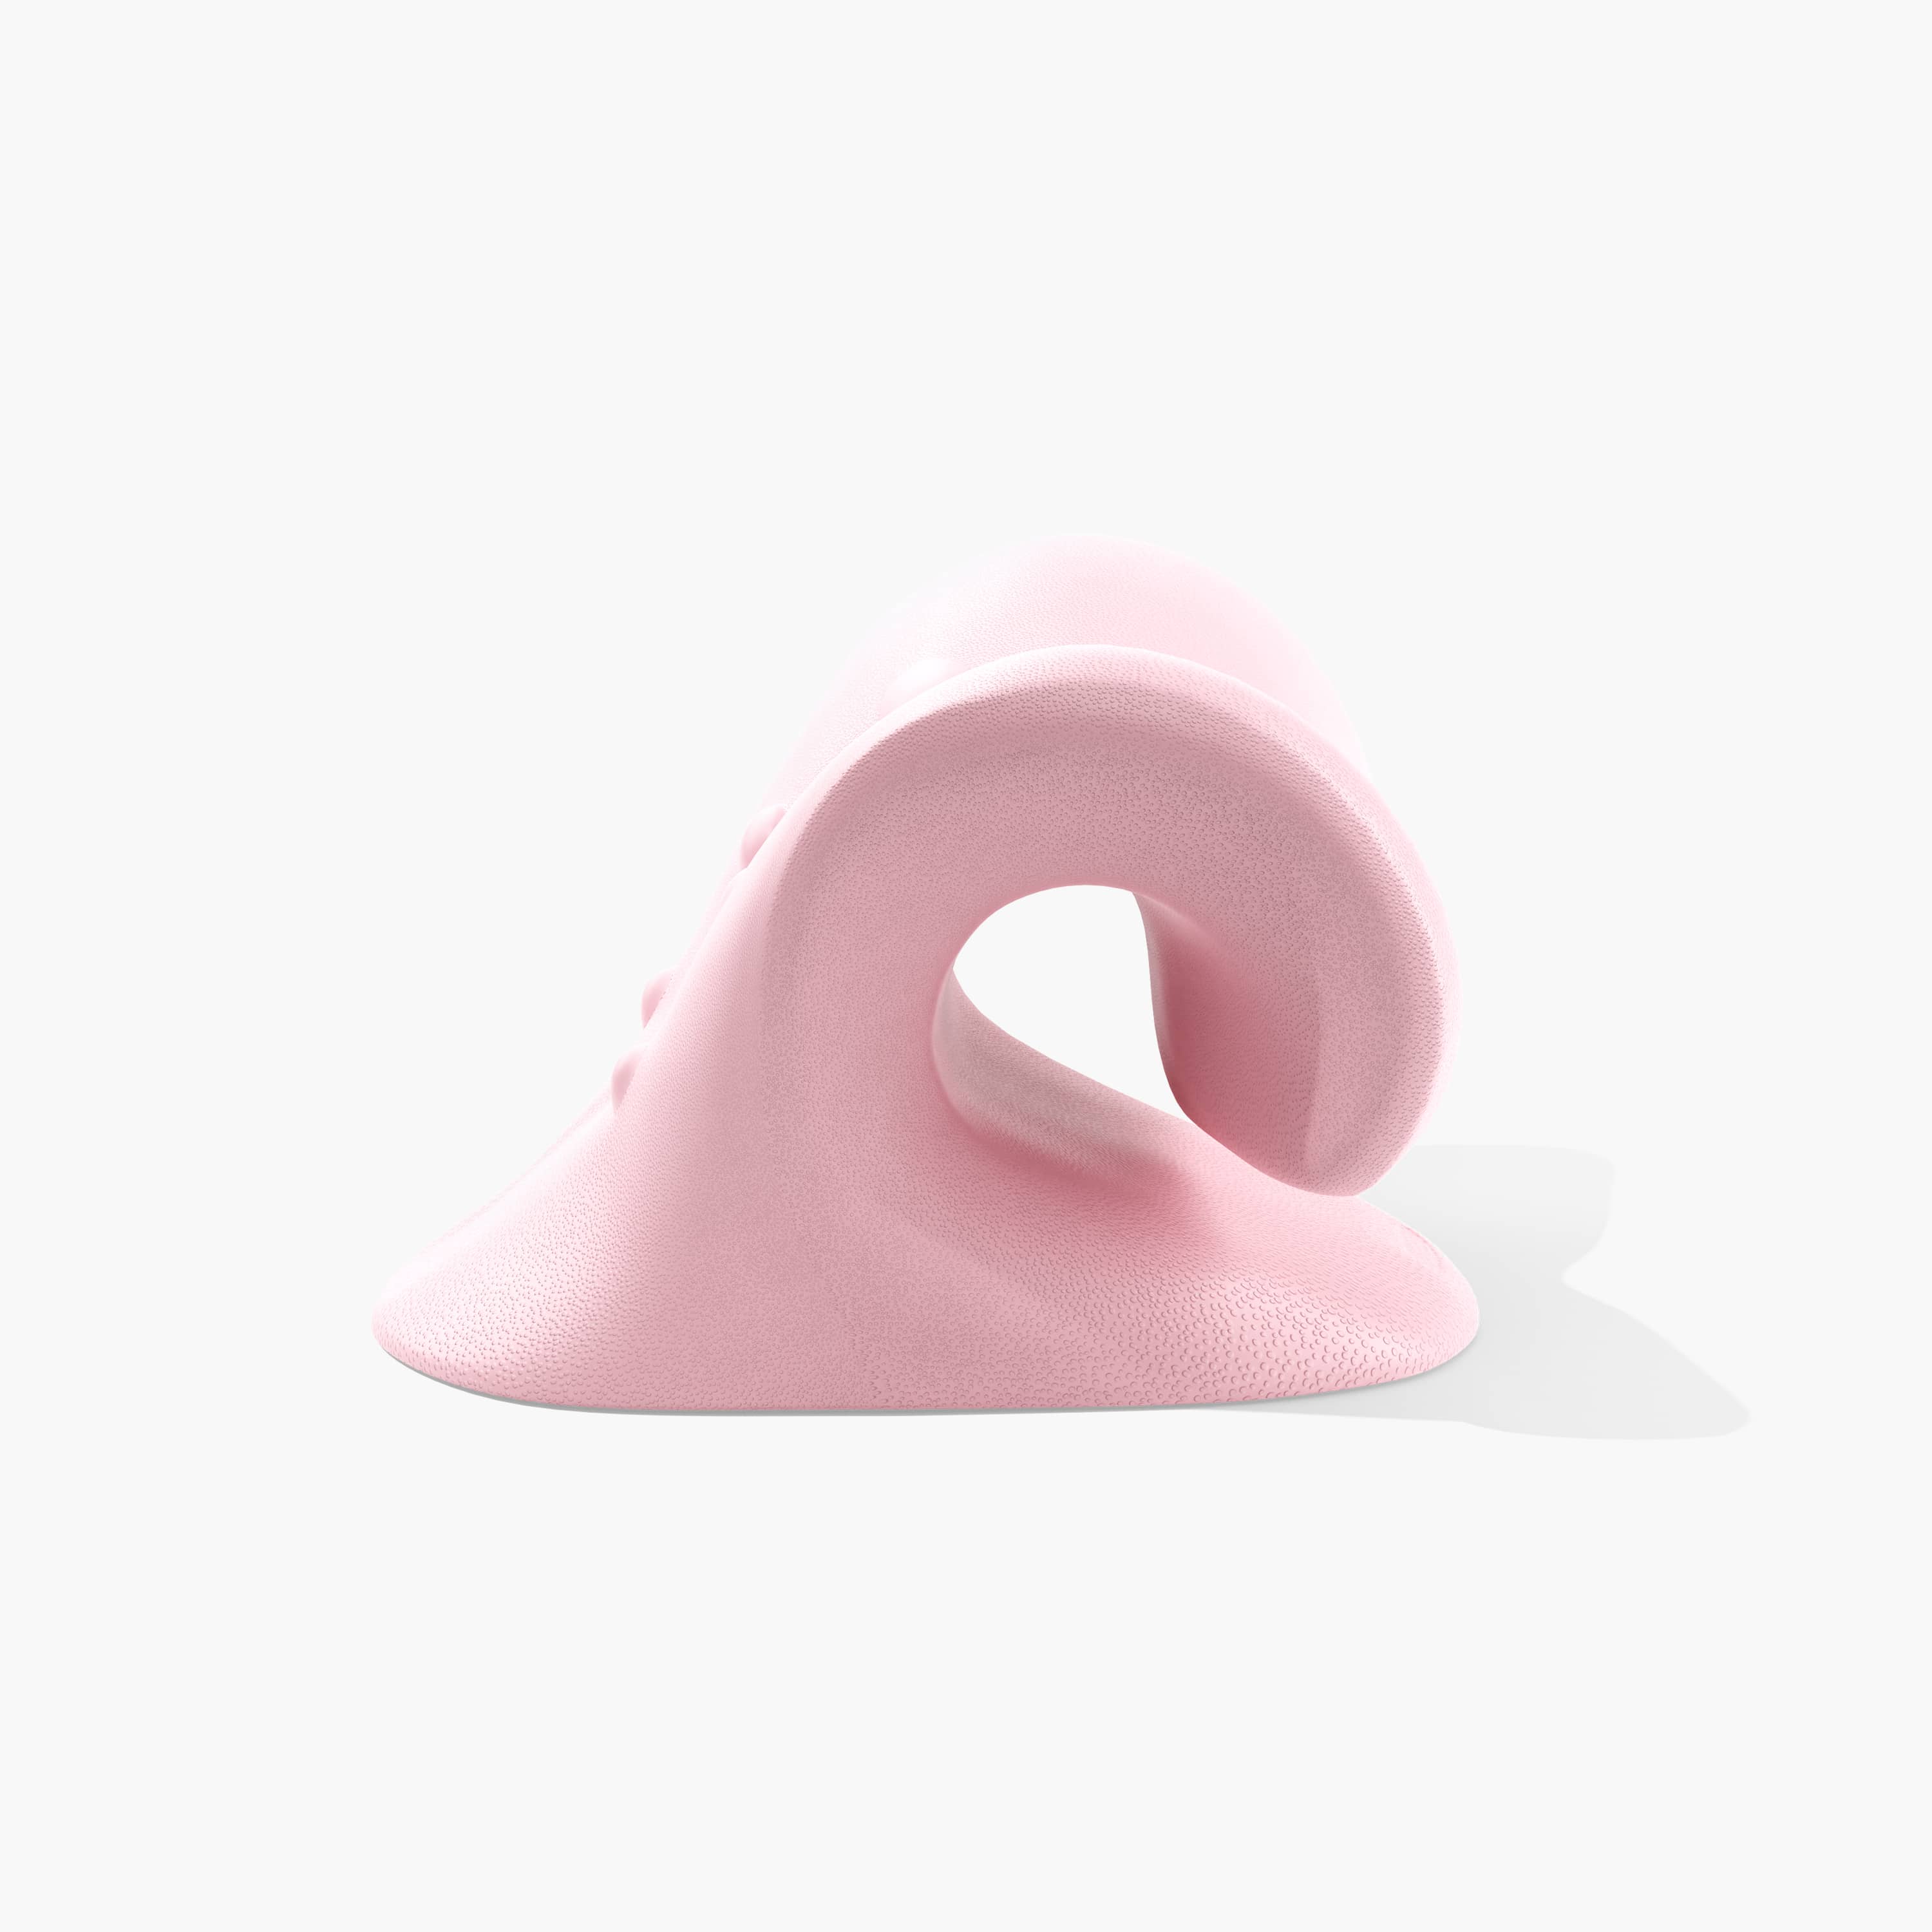 Juno by Nomisk. A pink cervical traction pillow that instantly relieves neck pain. Relieve tension, improve sleep, posture and blood flow by using Juno to stretch out your neck. Shown here from a profile view.